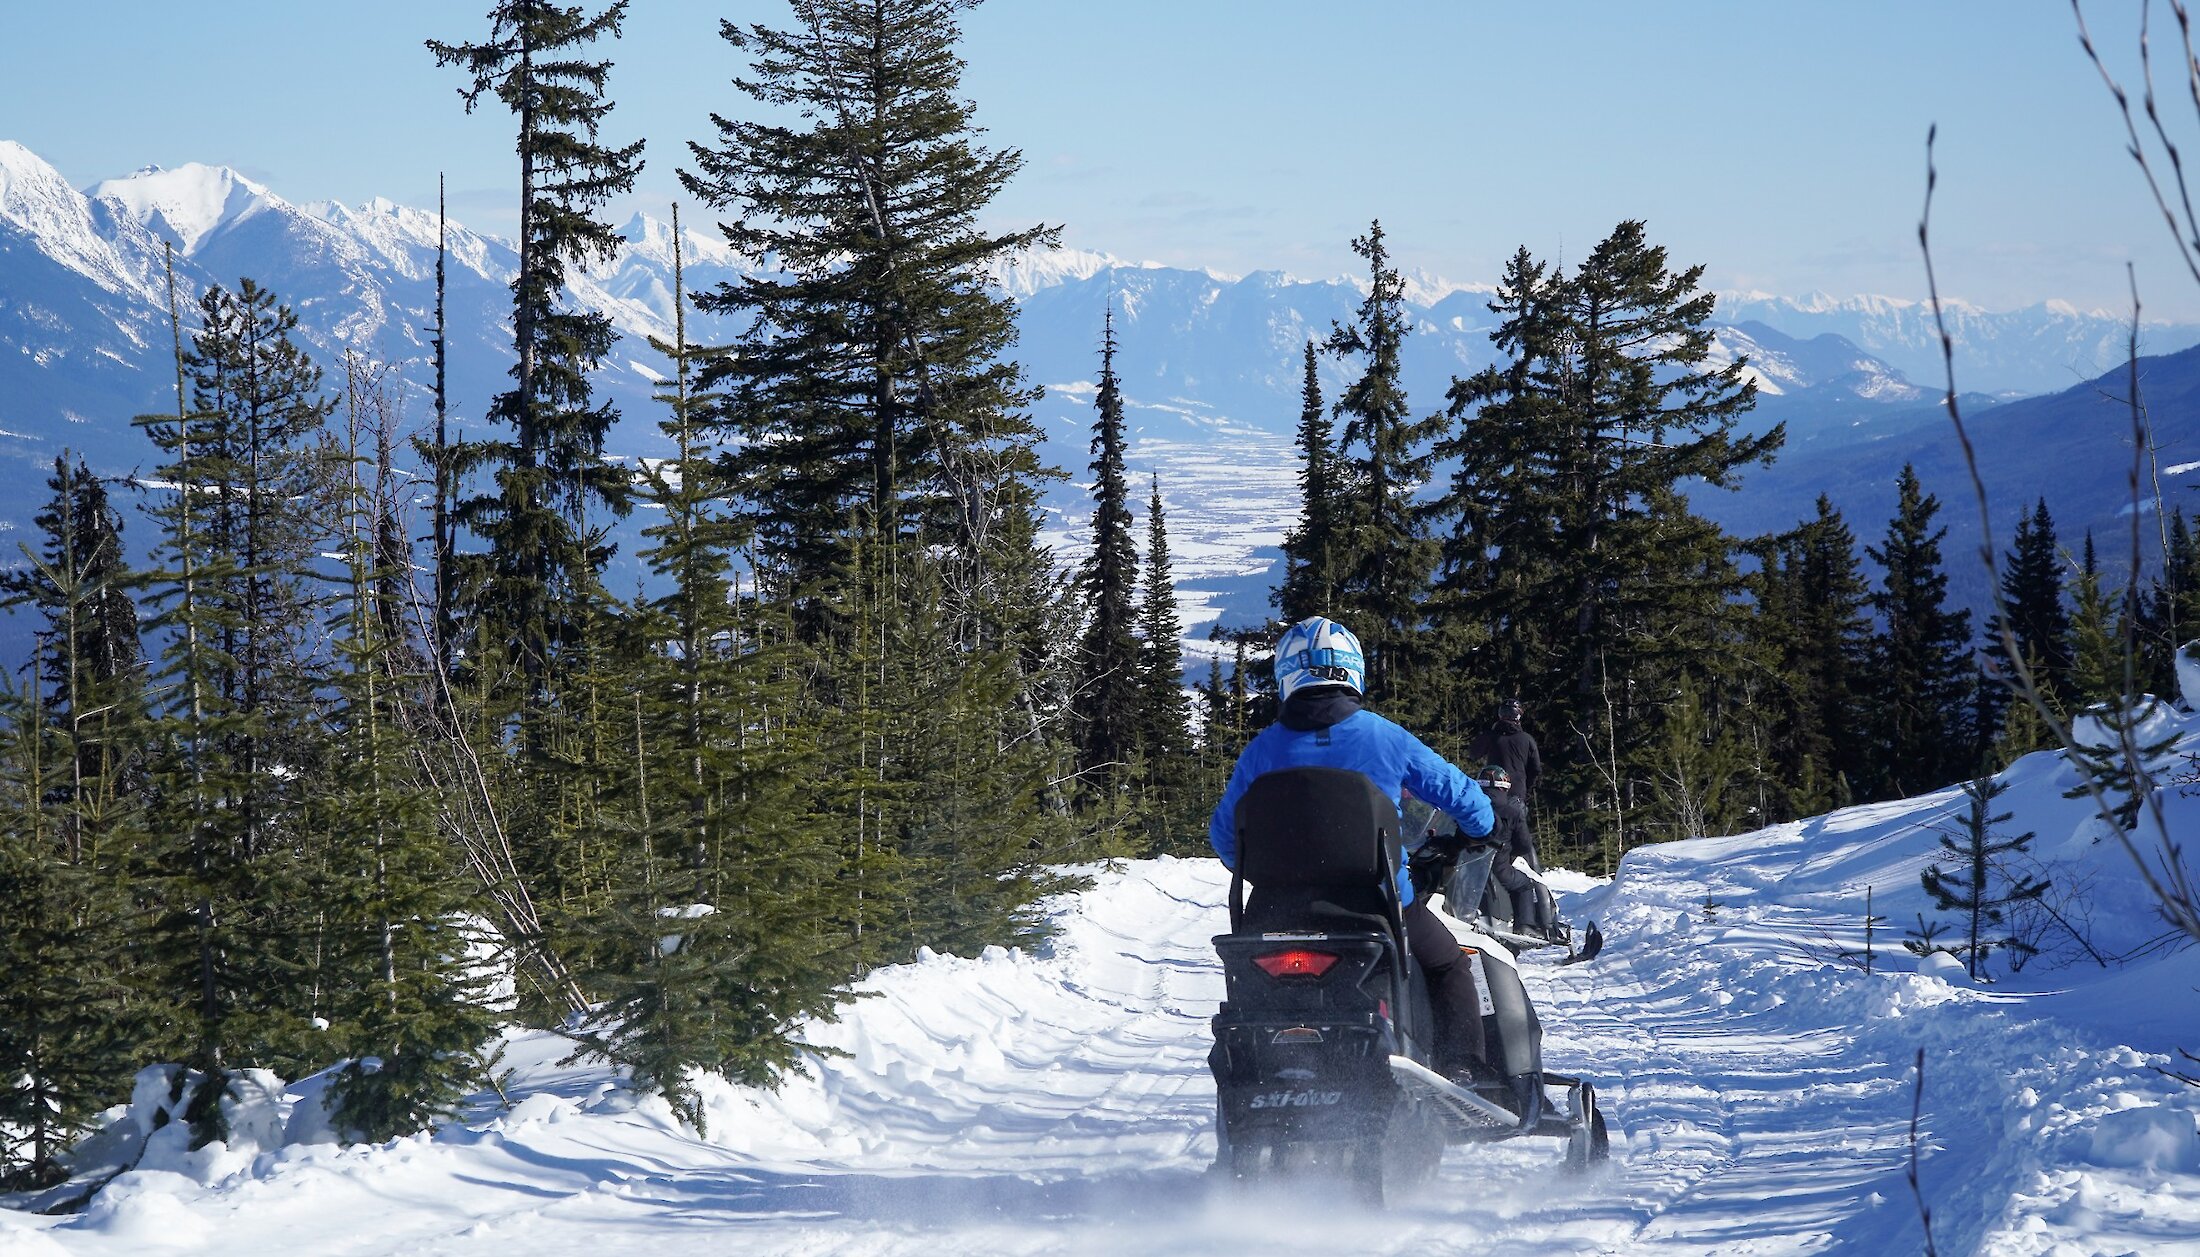 Stunning scenery on the snowmobile trails in Kicking Horse near Golden